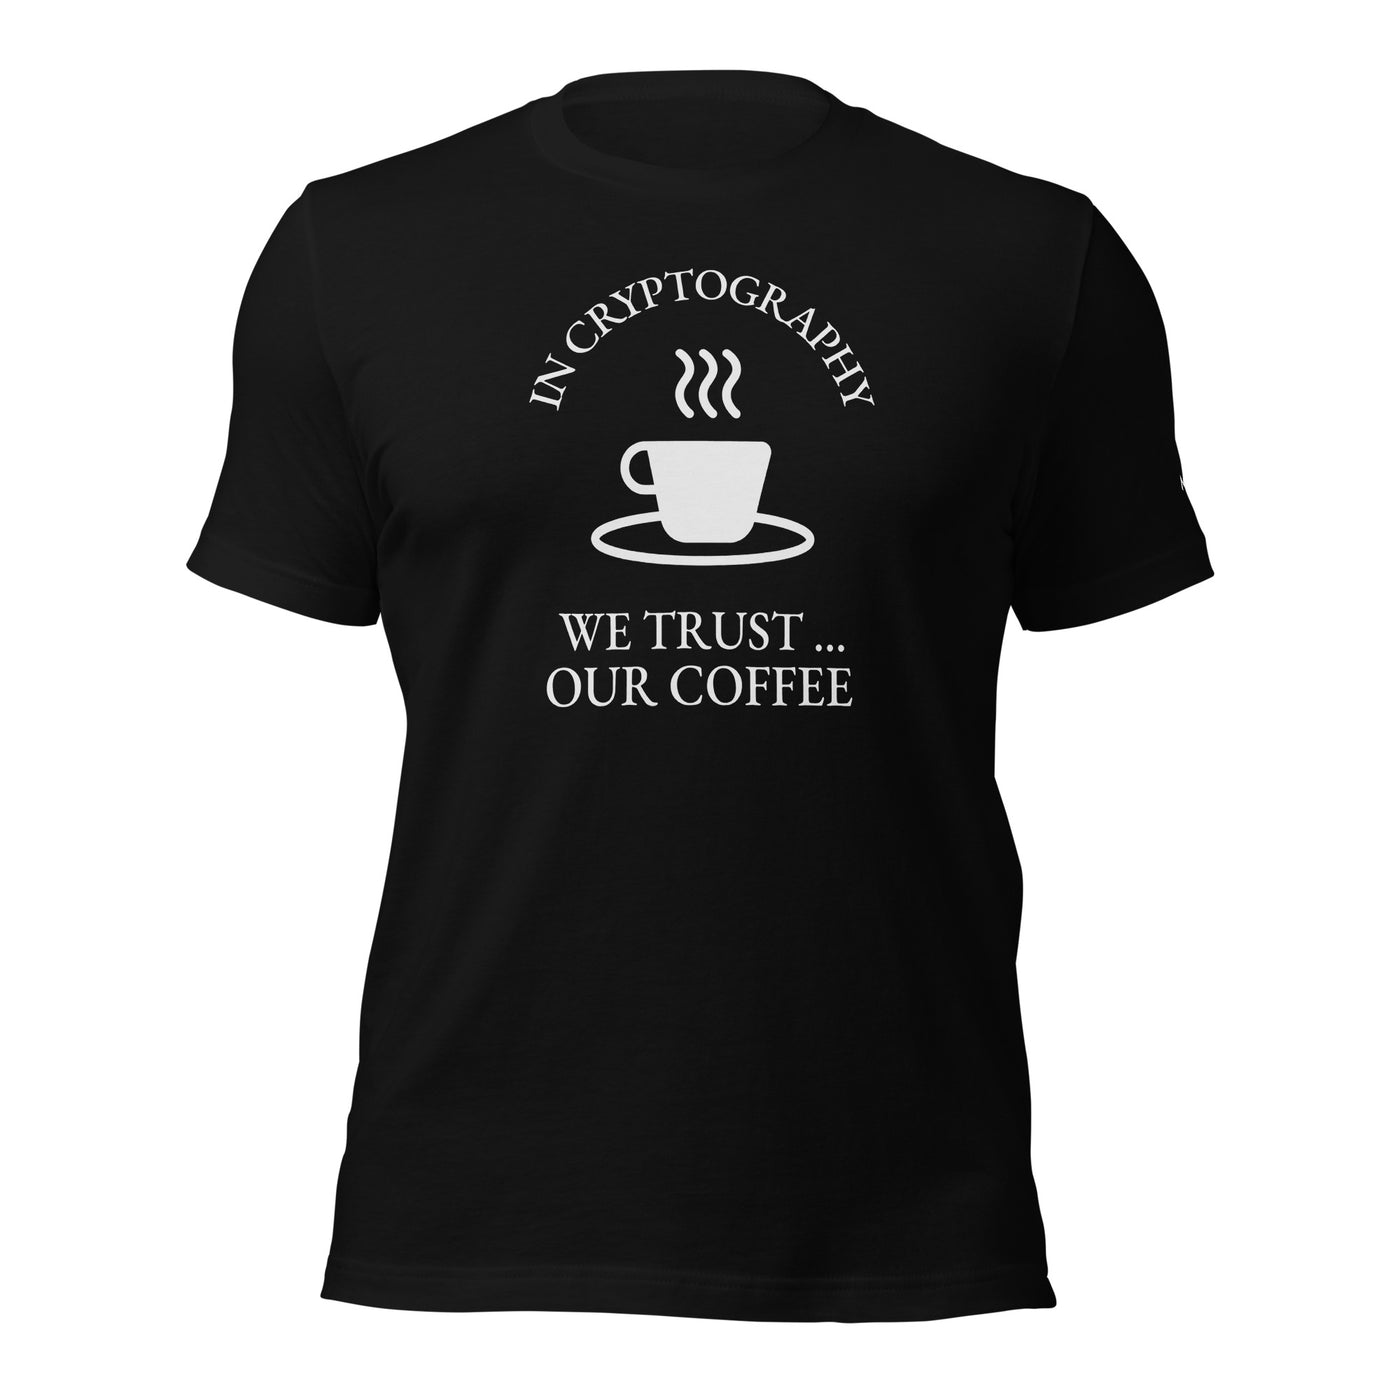 In cryptography, we trust... our coffee - Unisex t-shirt